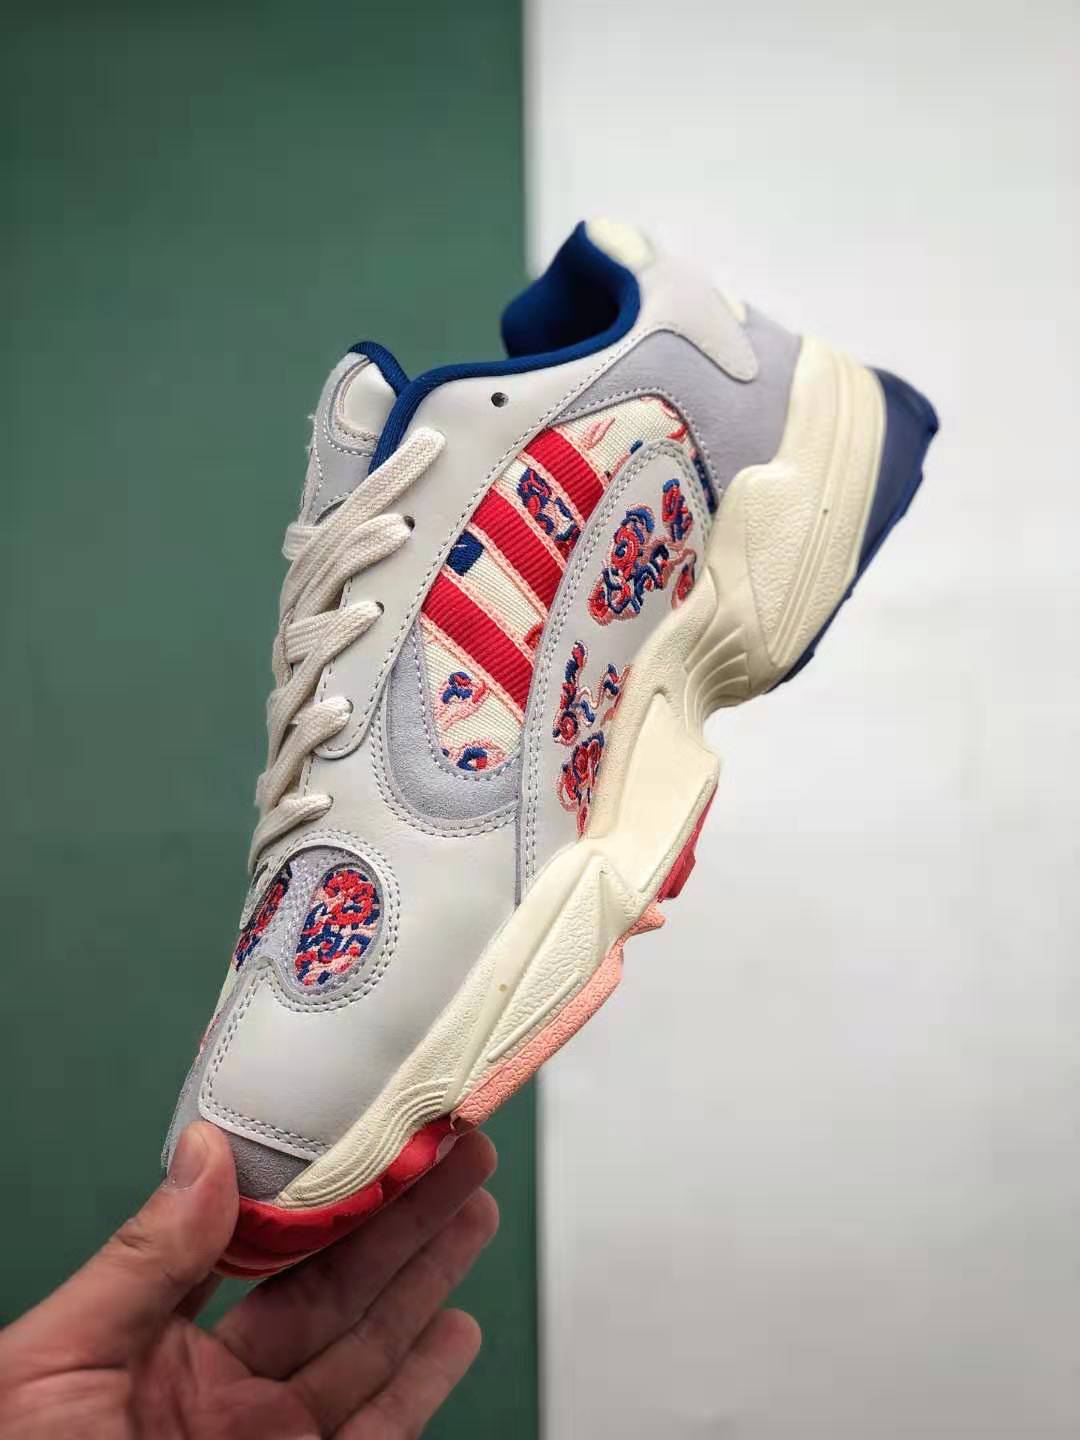 Adidas Yung-1 Clouds Sneakers - Get the Coolest Retro Style!